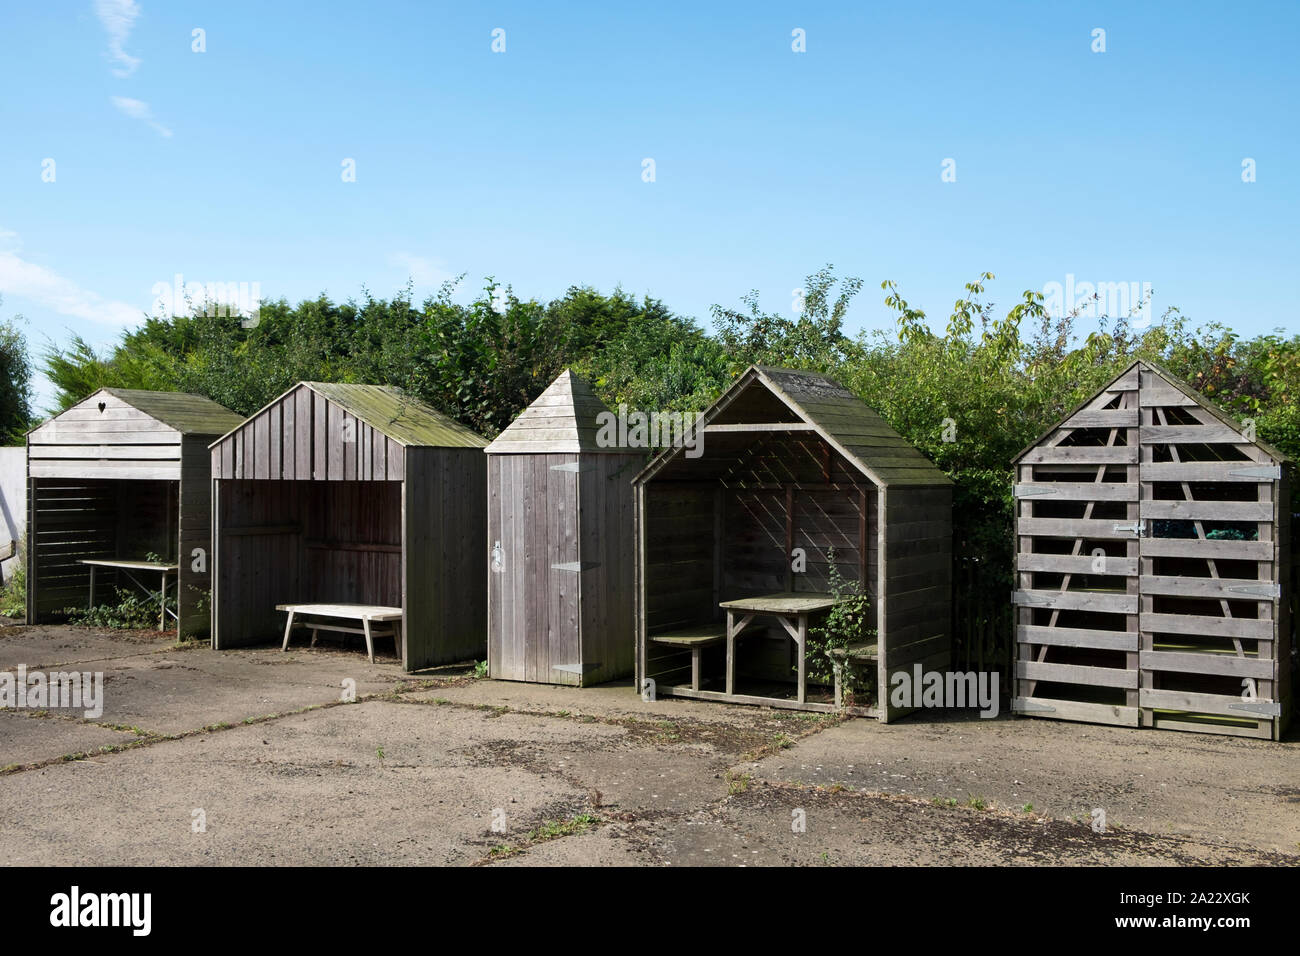 Beach hut themed wooden sheds Stock Photo